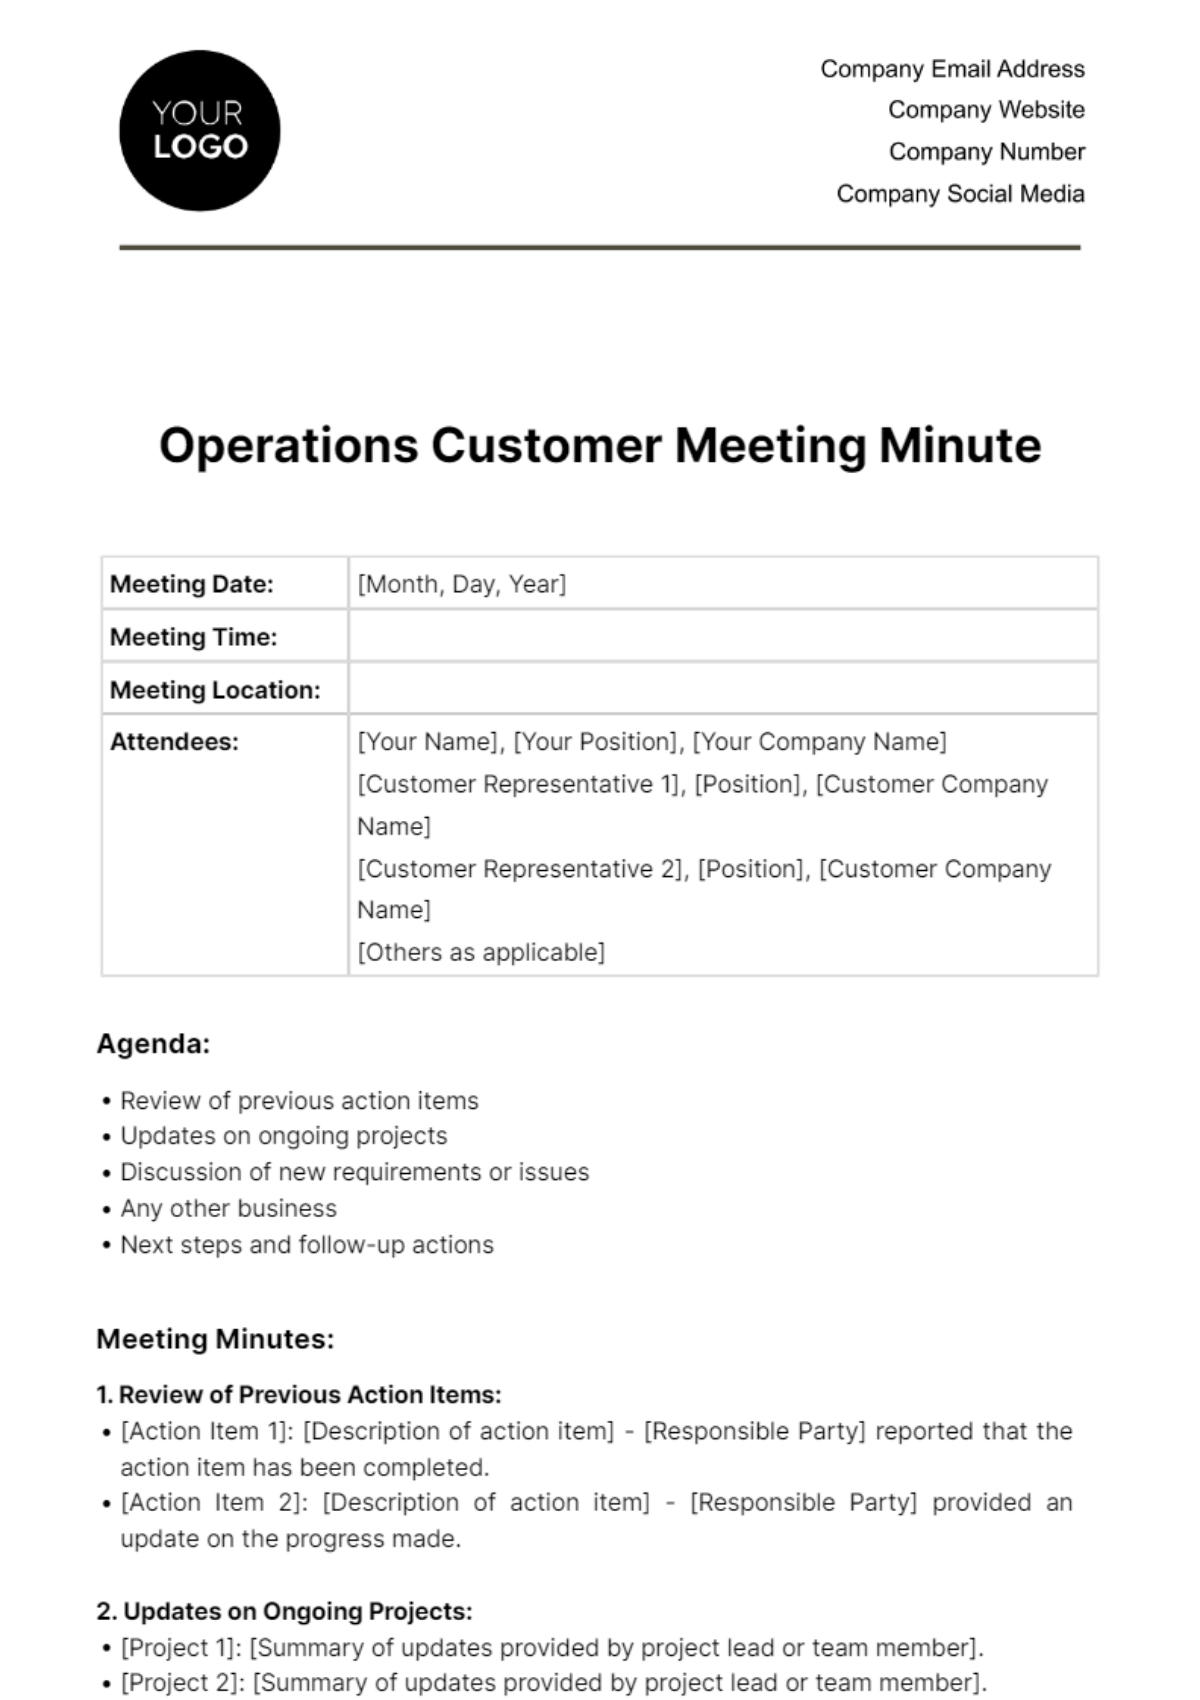 Free Operations Customer Meeting Minute Template